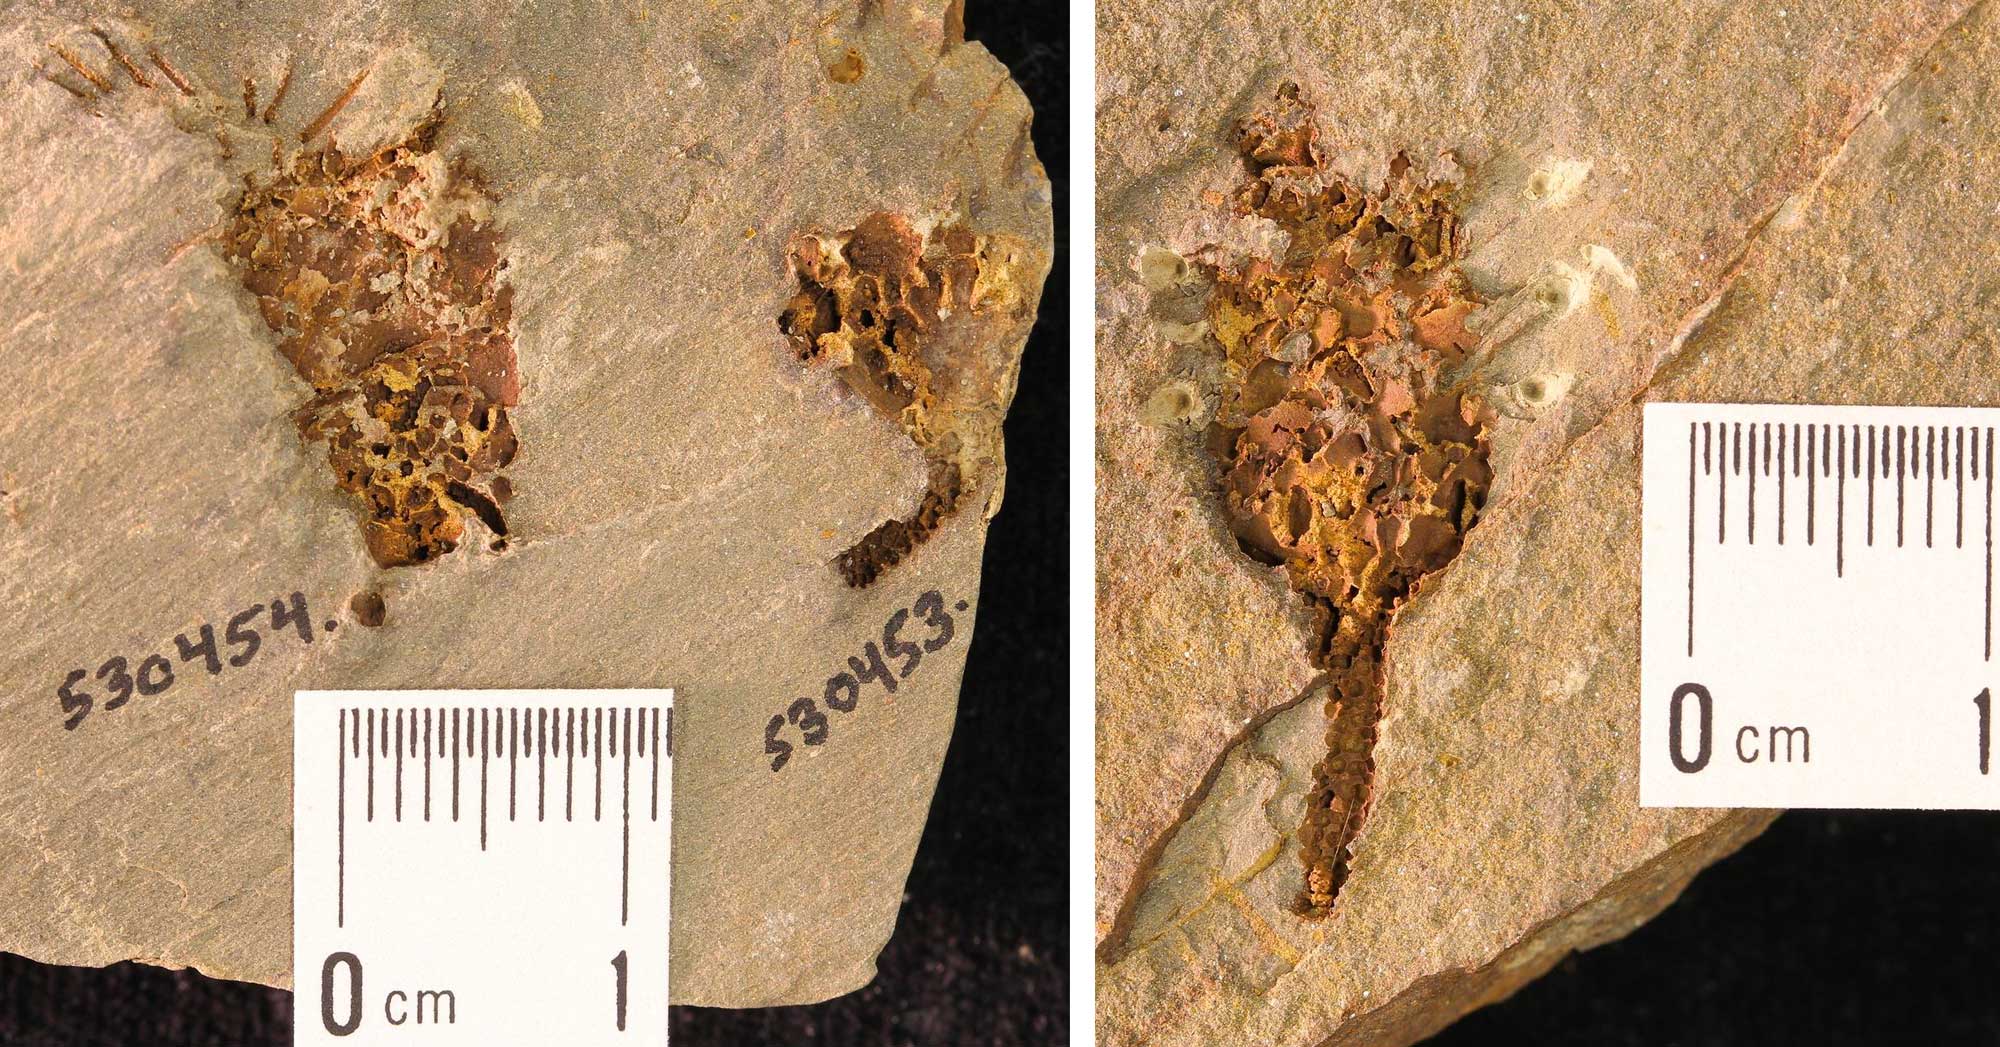 2-panel figure showing photos of the fossil echinoderm Golgia palmeri from the Cambrian southeastern Idaho. Panel 1: A portion of a rock preserving two Golgia specimens. The better-preserved specimen has a funnel-shaped calyx with think arms extending from the top. The other specimen retains a portion of its stalk. Panel 2: A portion of a rock preserving a poorly preserved specimen of Golgia. The specimen has a calyx attached to a piece of the stalk. The stalk appears to be made up of a series of stacked disks.